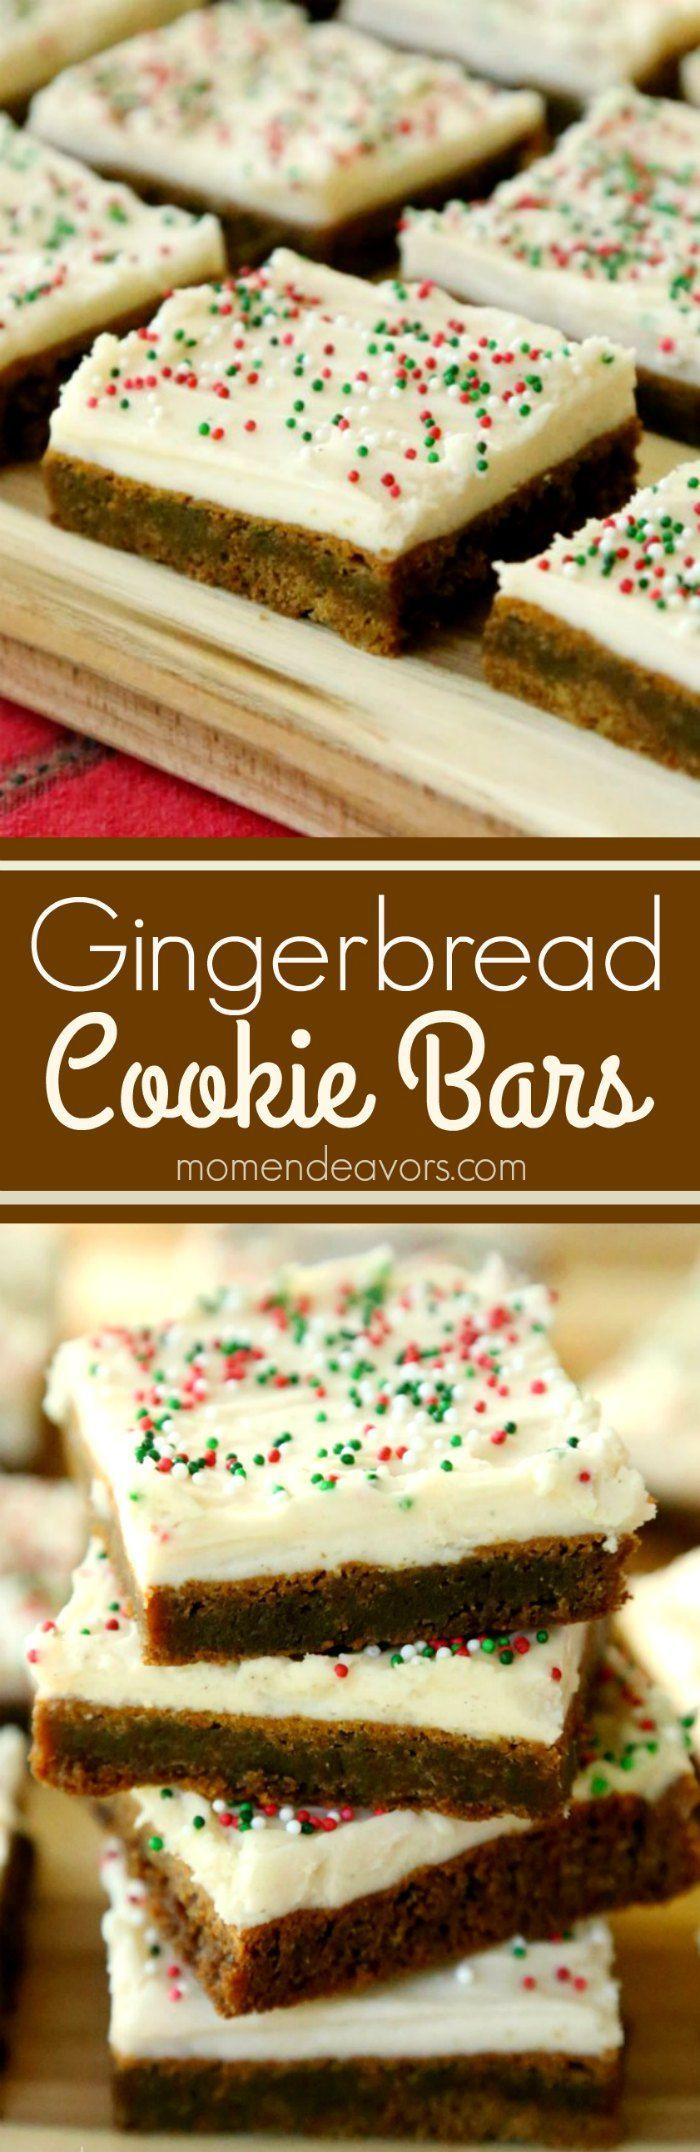 Delicious Christmas Desserts
 Soft & chewy gingerbread cookie bars with cream cheese